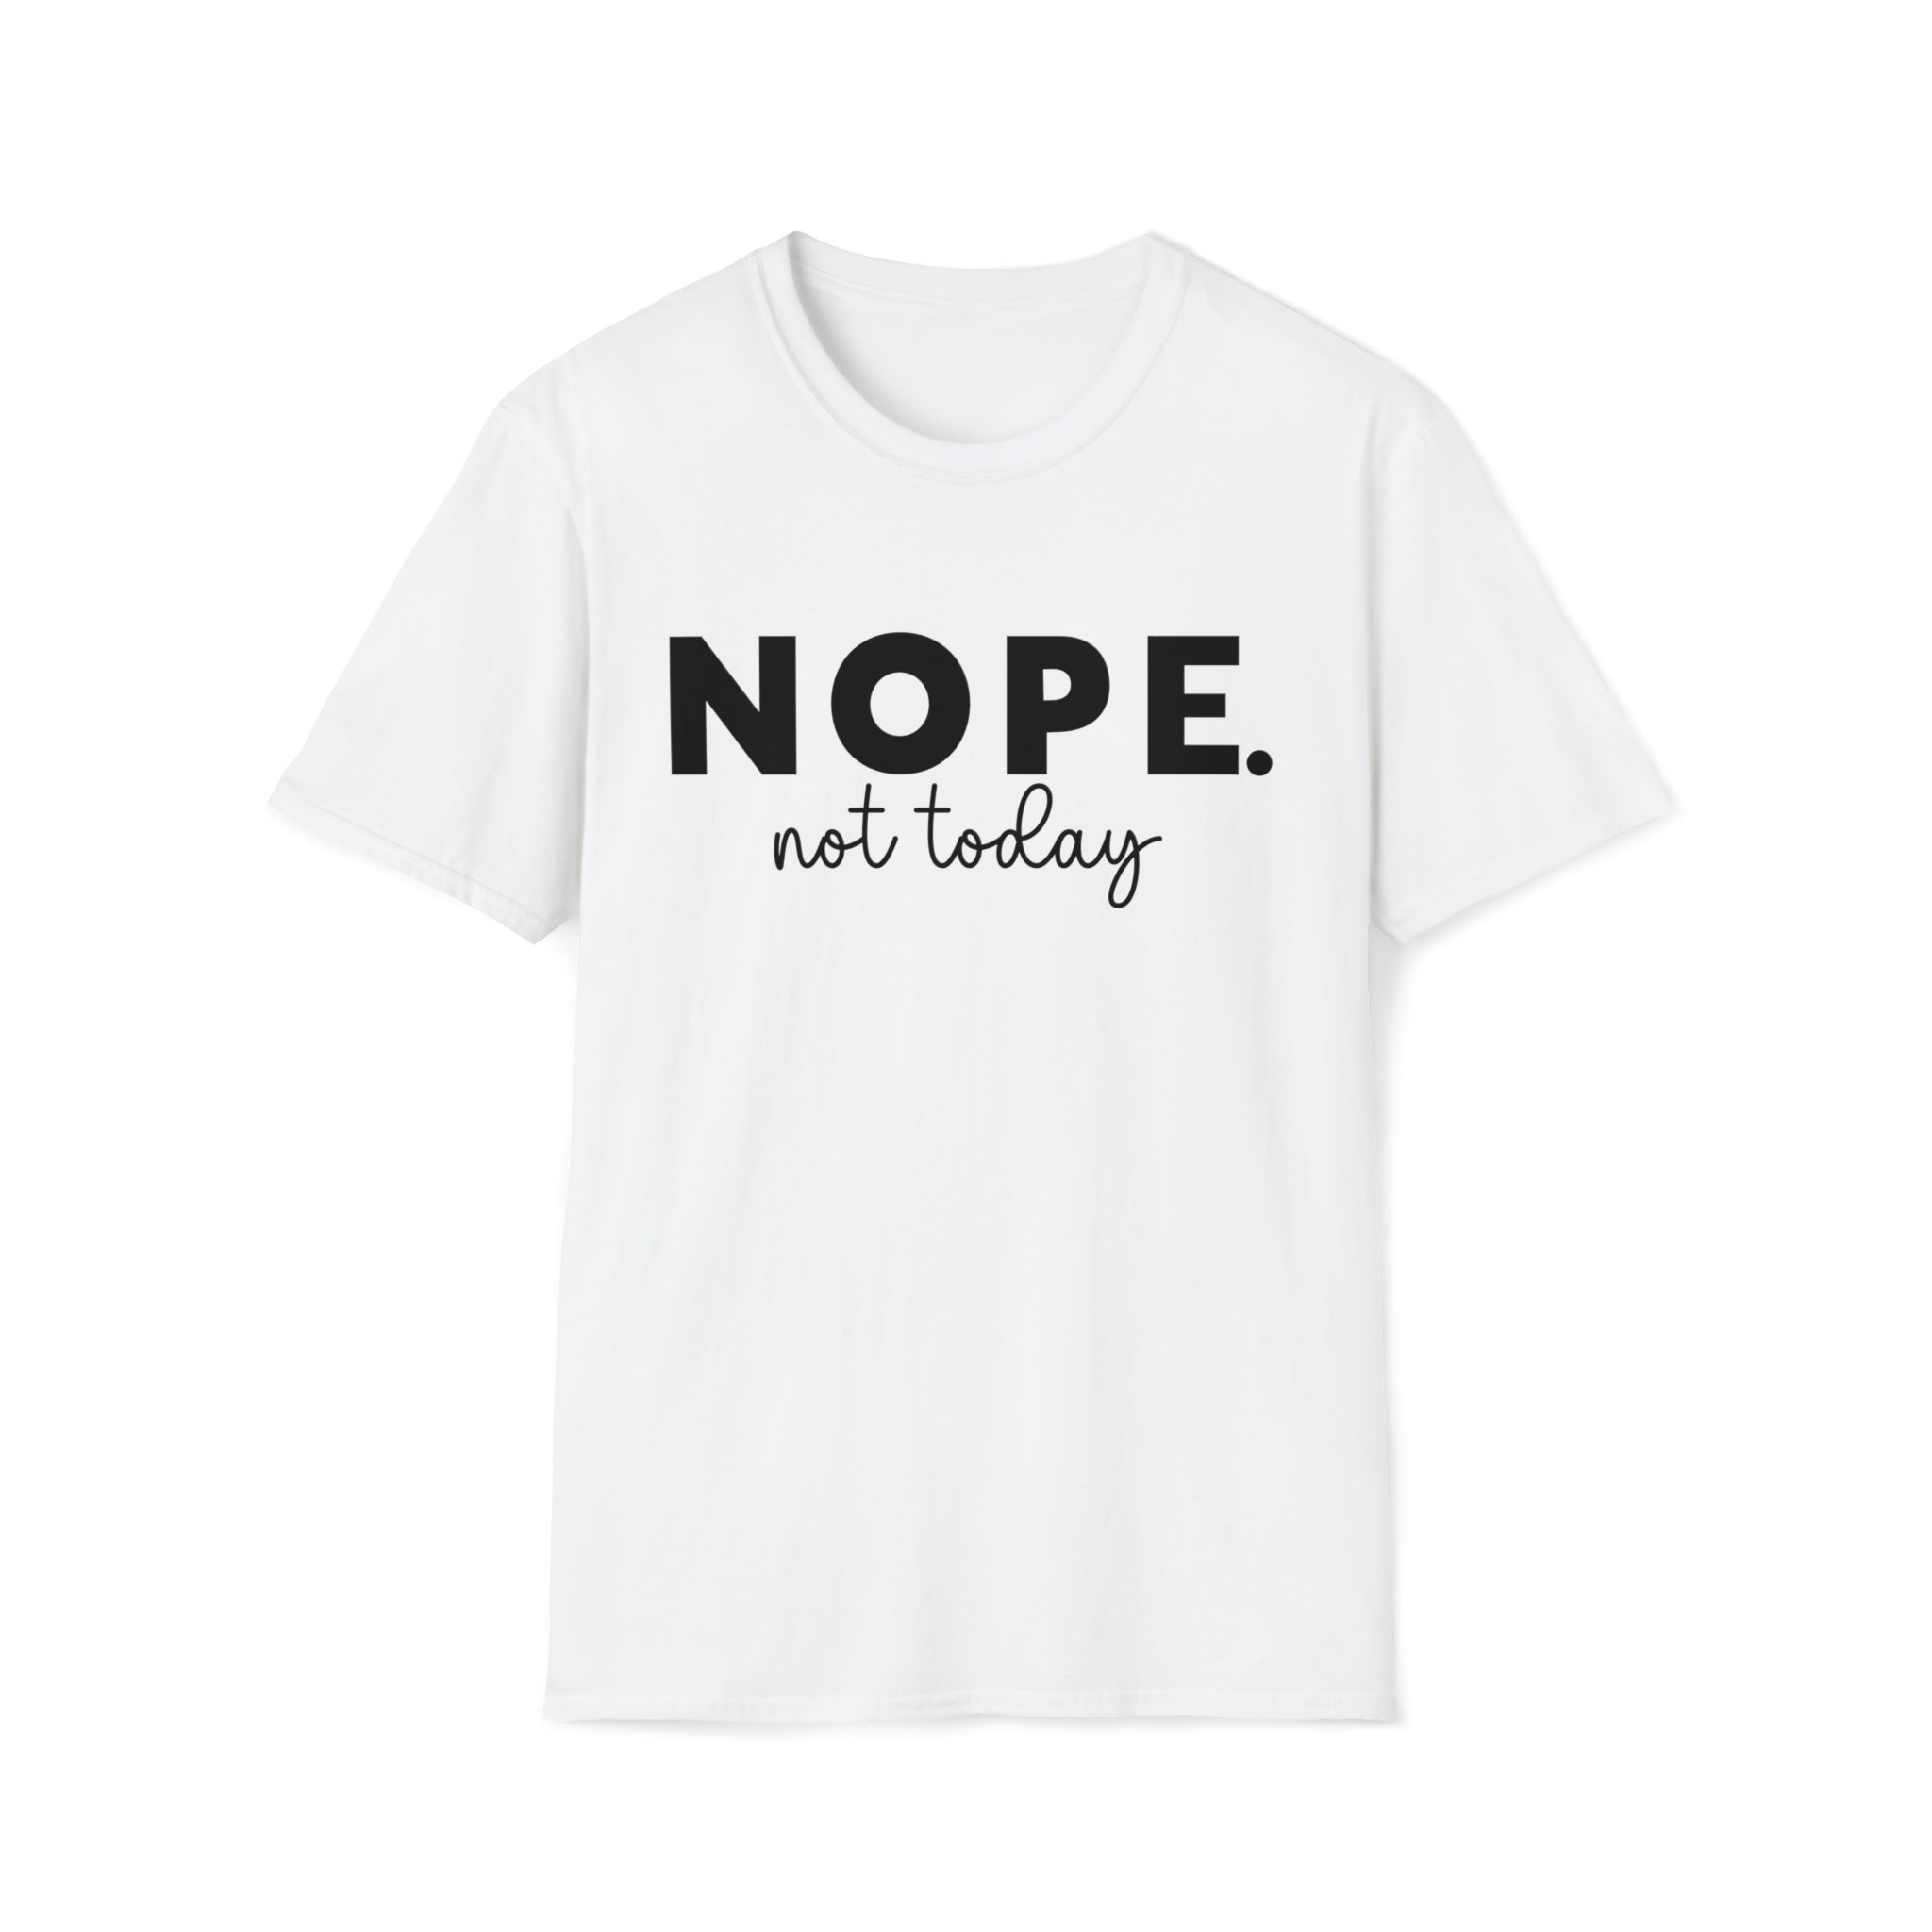 Nope Tshirt - Nope Not Today, Not Tomorrow Either Front and Back T Shi –  Sideways Boldly